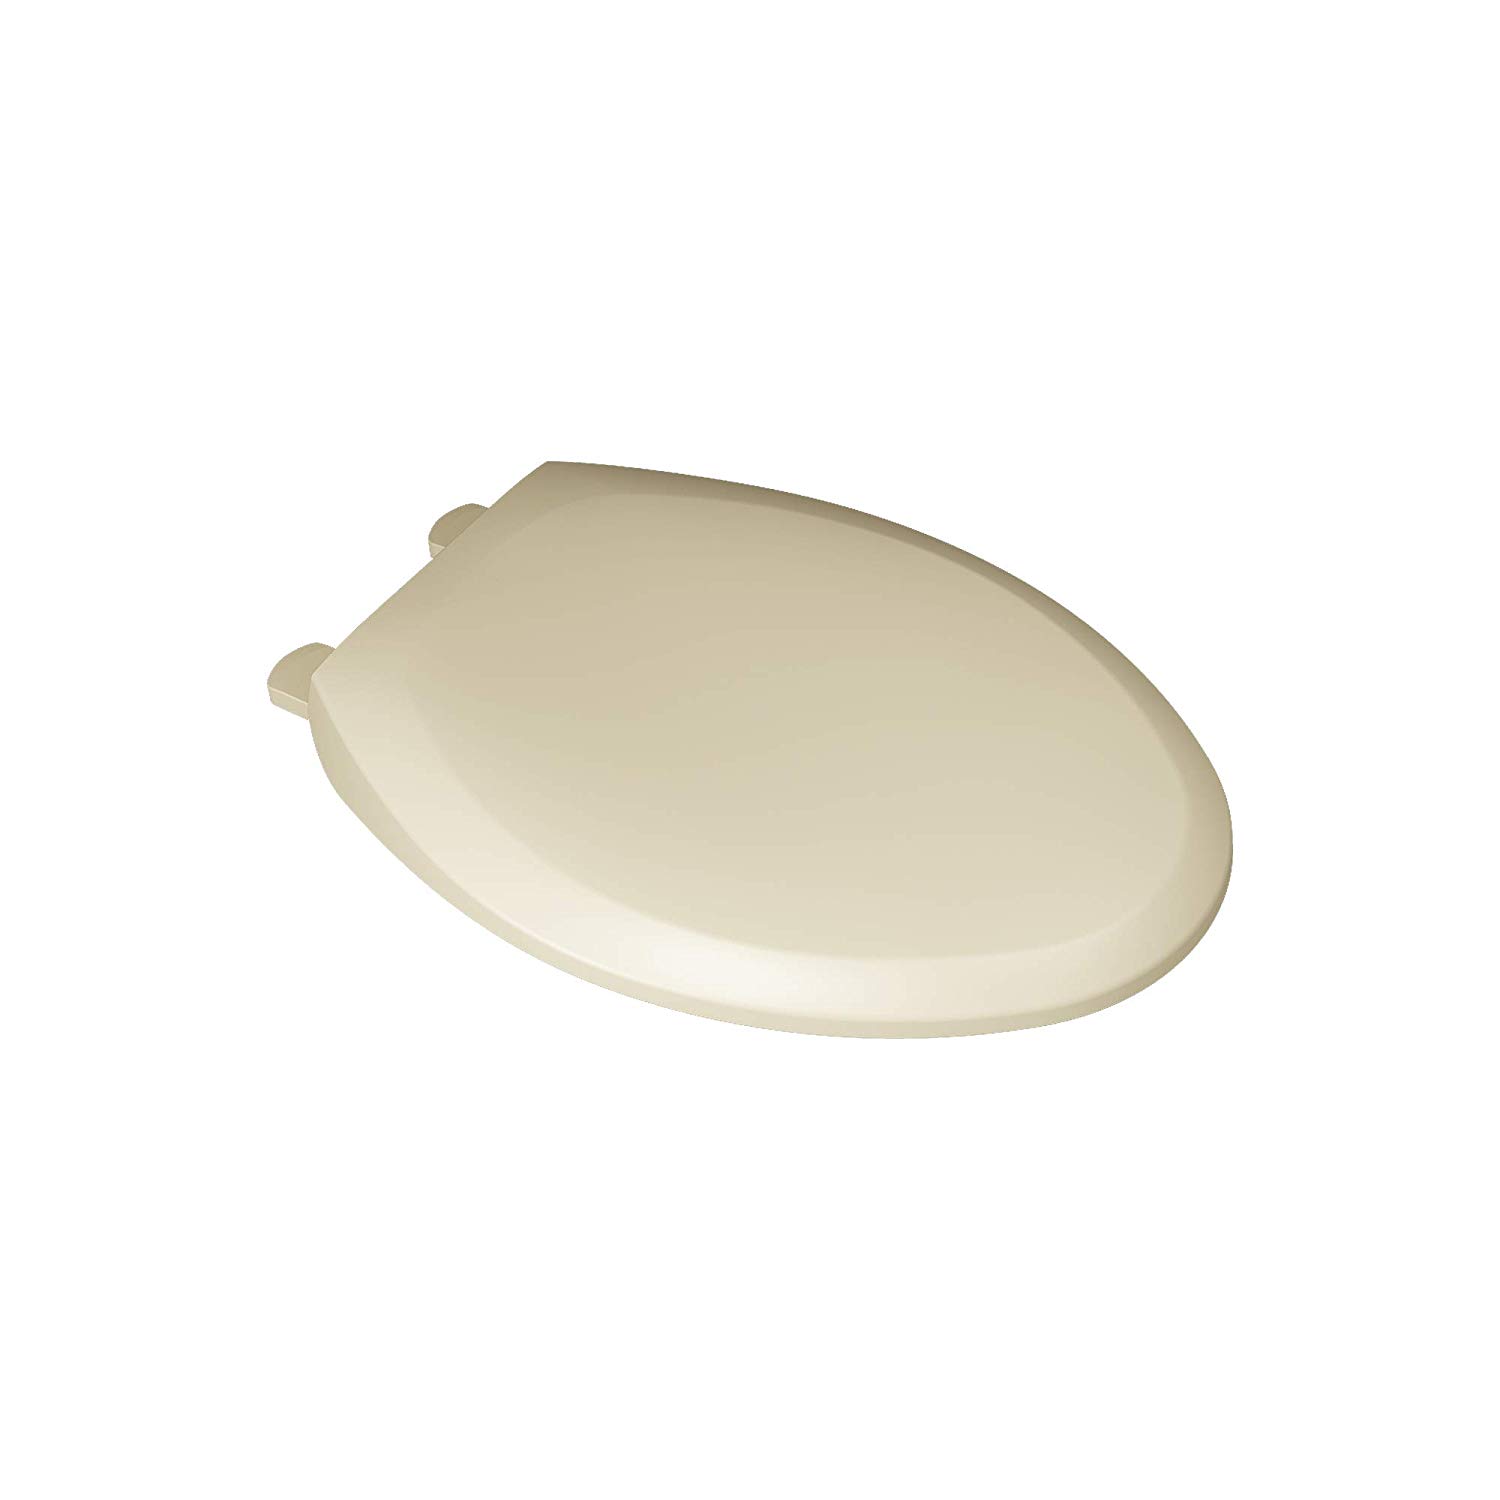 Champion Slow-Close Elongated Front Toilet Seat in Bone